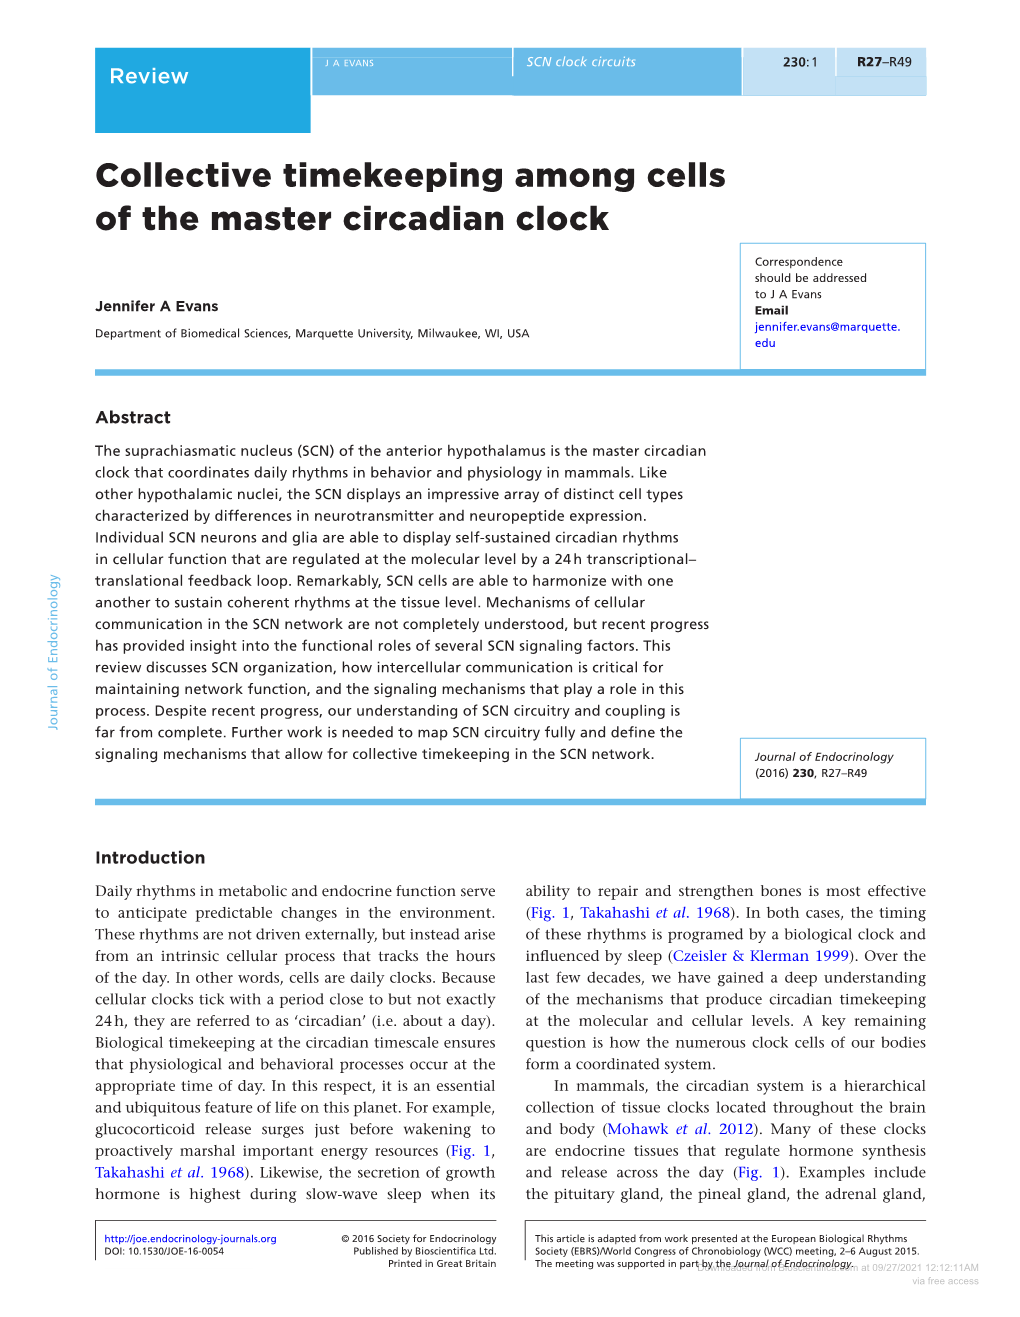 Collective Timekeeping Among Cells of the Master Circadian Clock